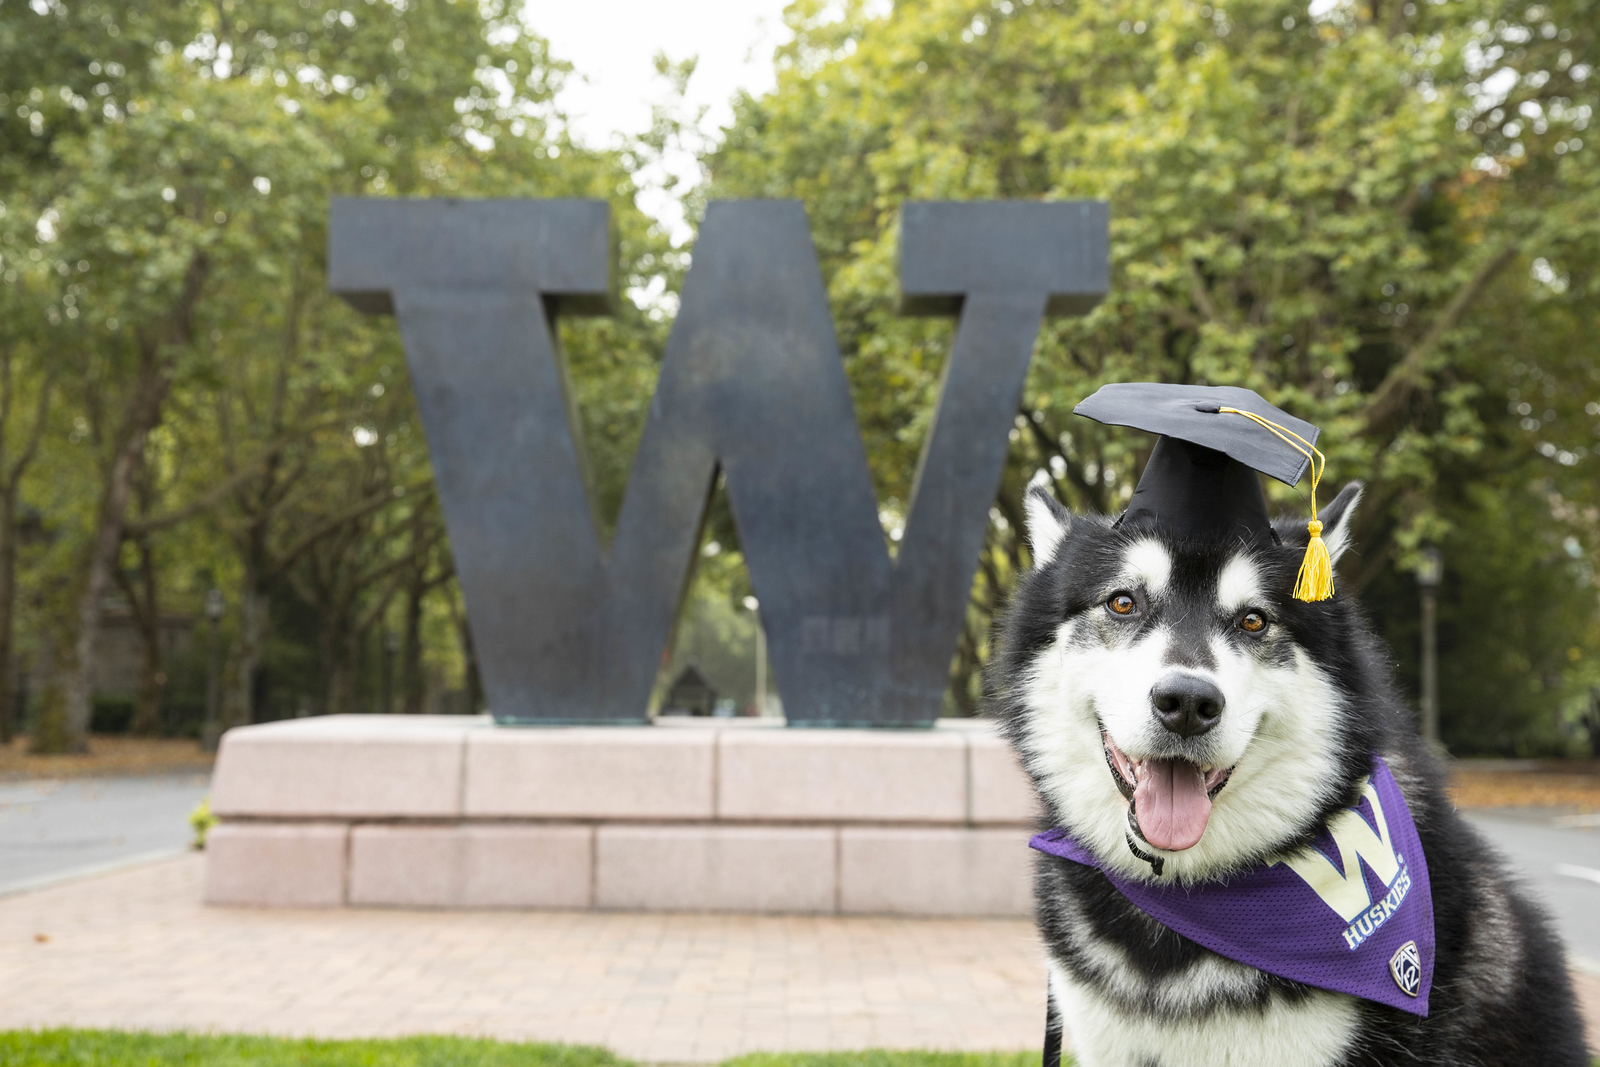 Dubs the Husky stands next to a bronze W wearing a mortarboard